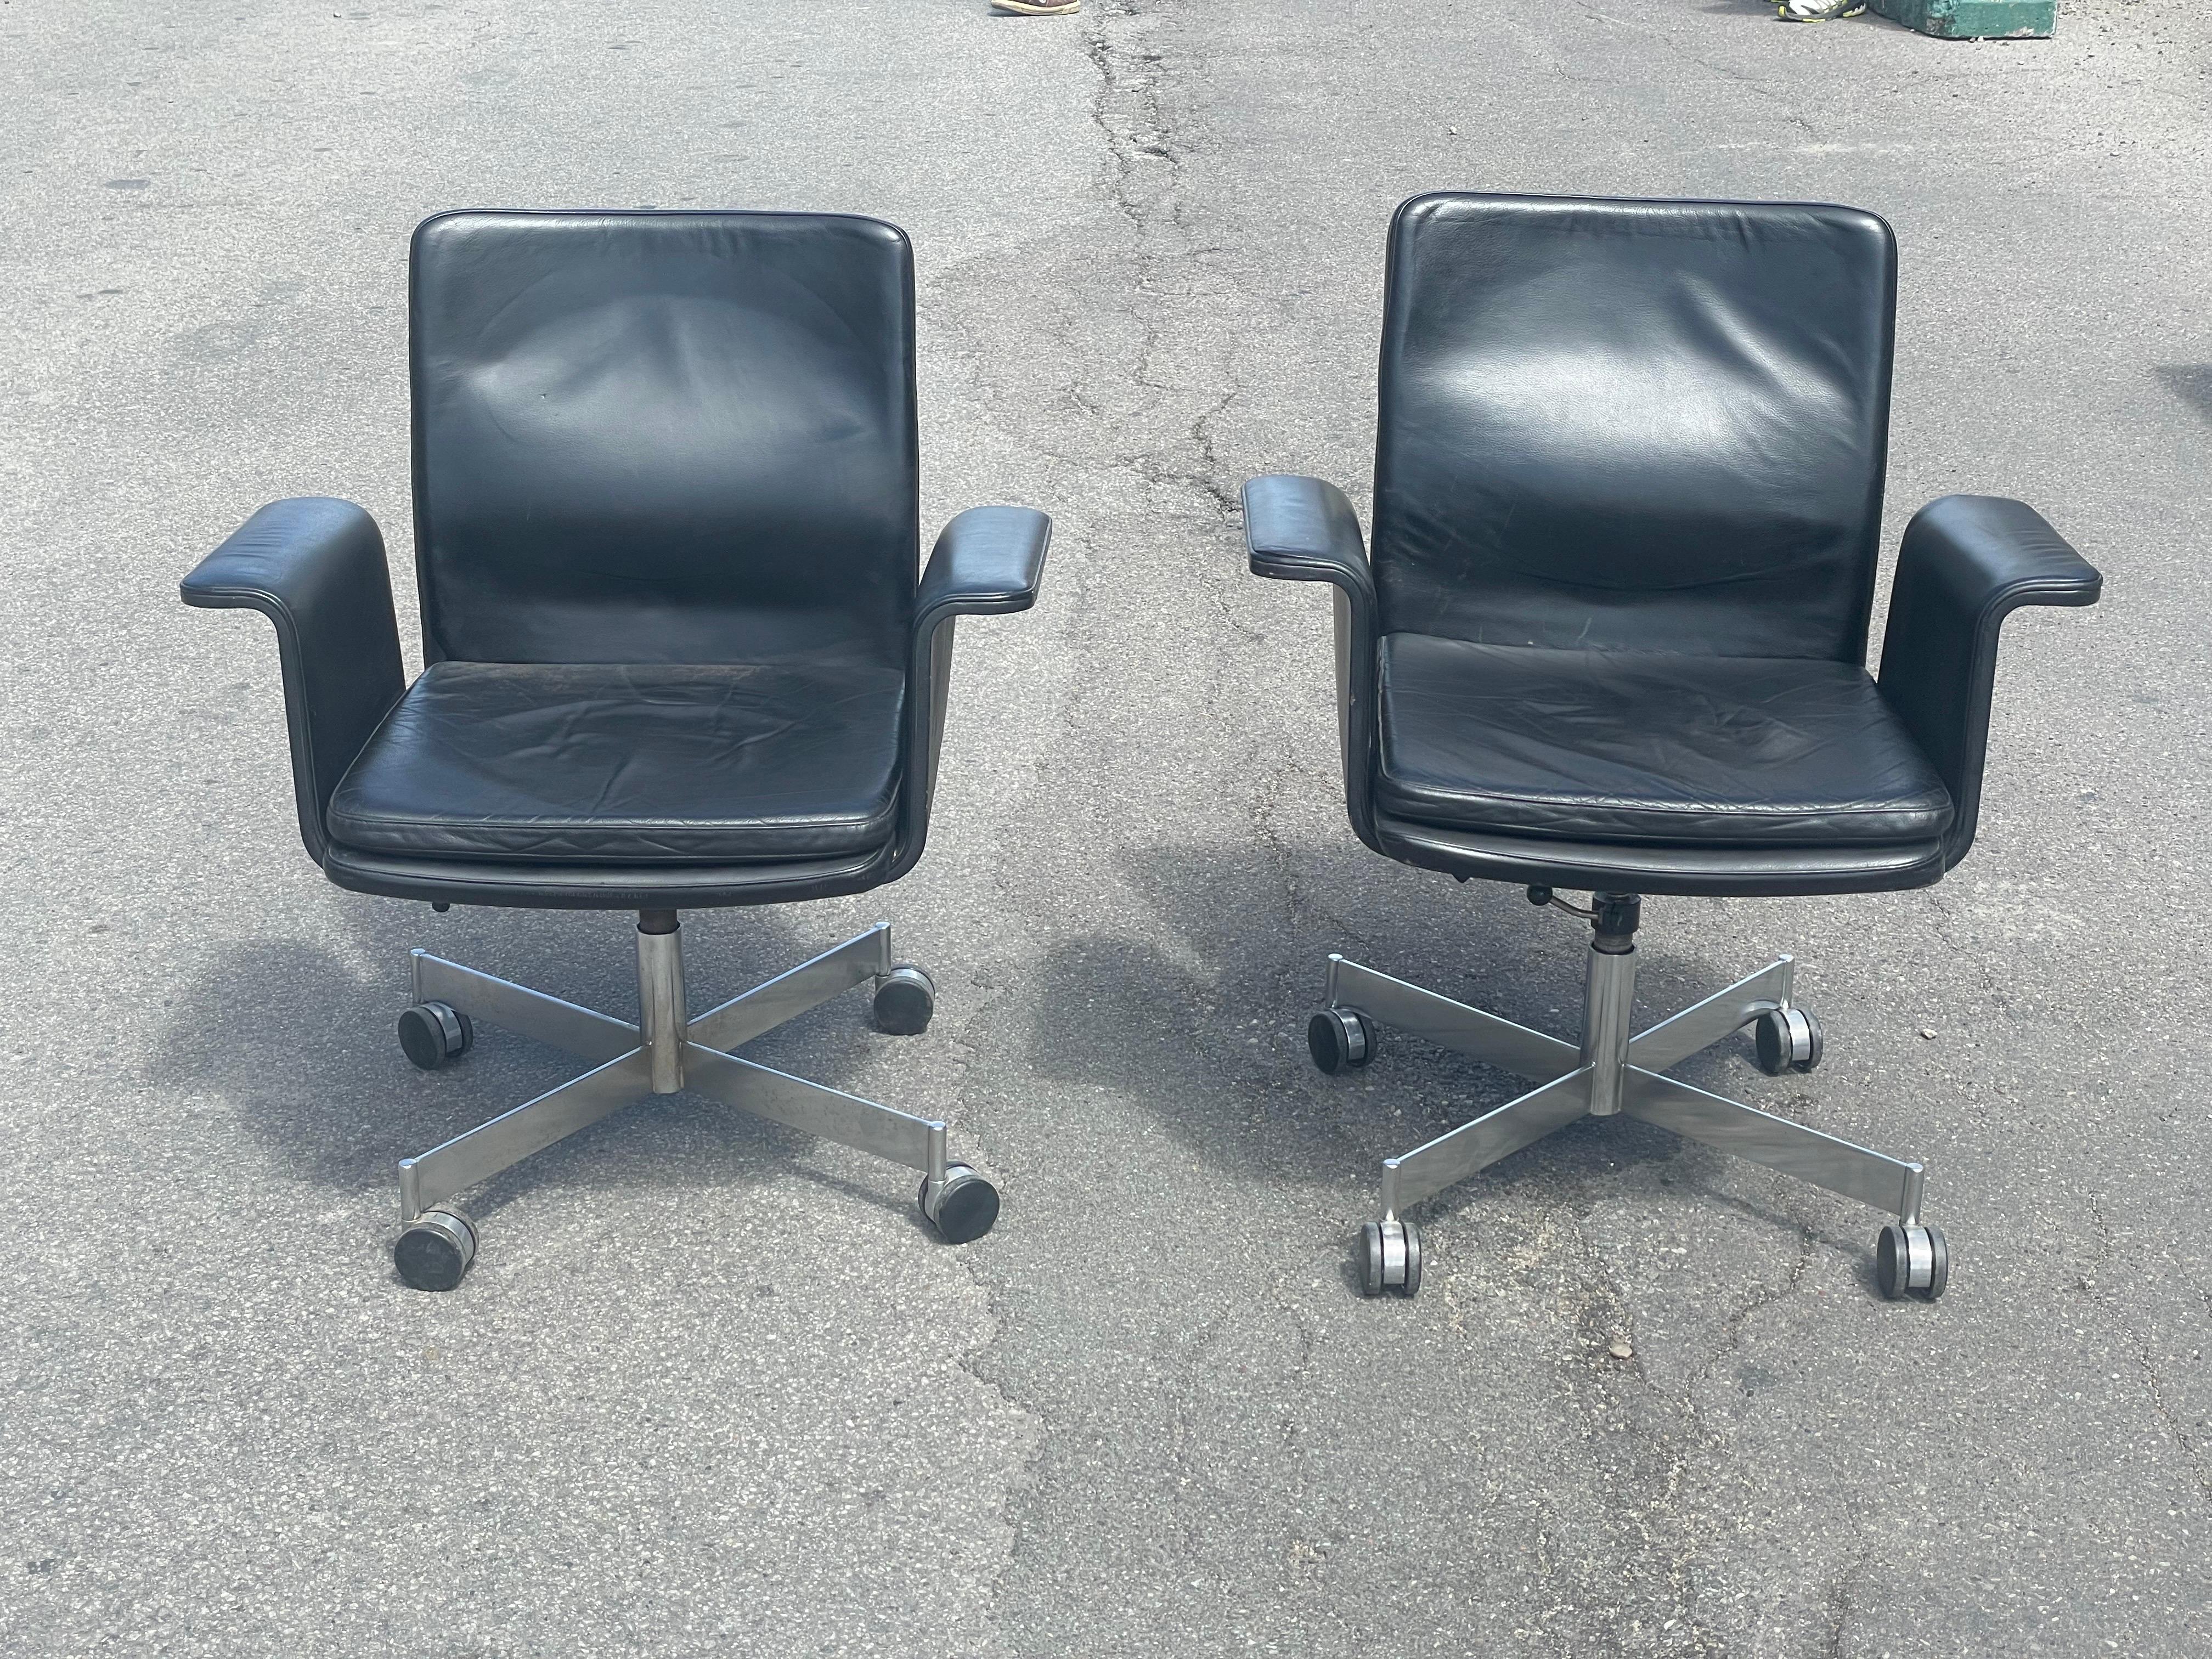 Mid-20th Century Danish Midcentury Desk Chairs in Patinated Leather by Jørgen Rasmussen For Sale